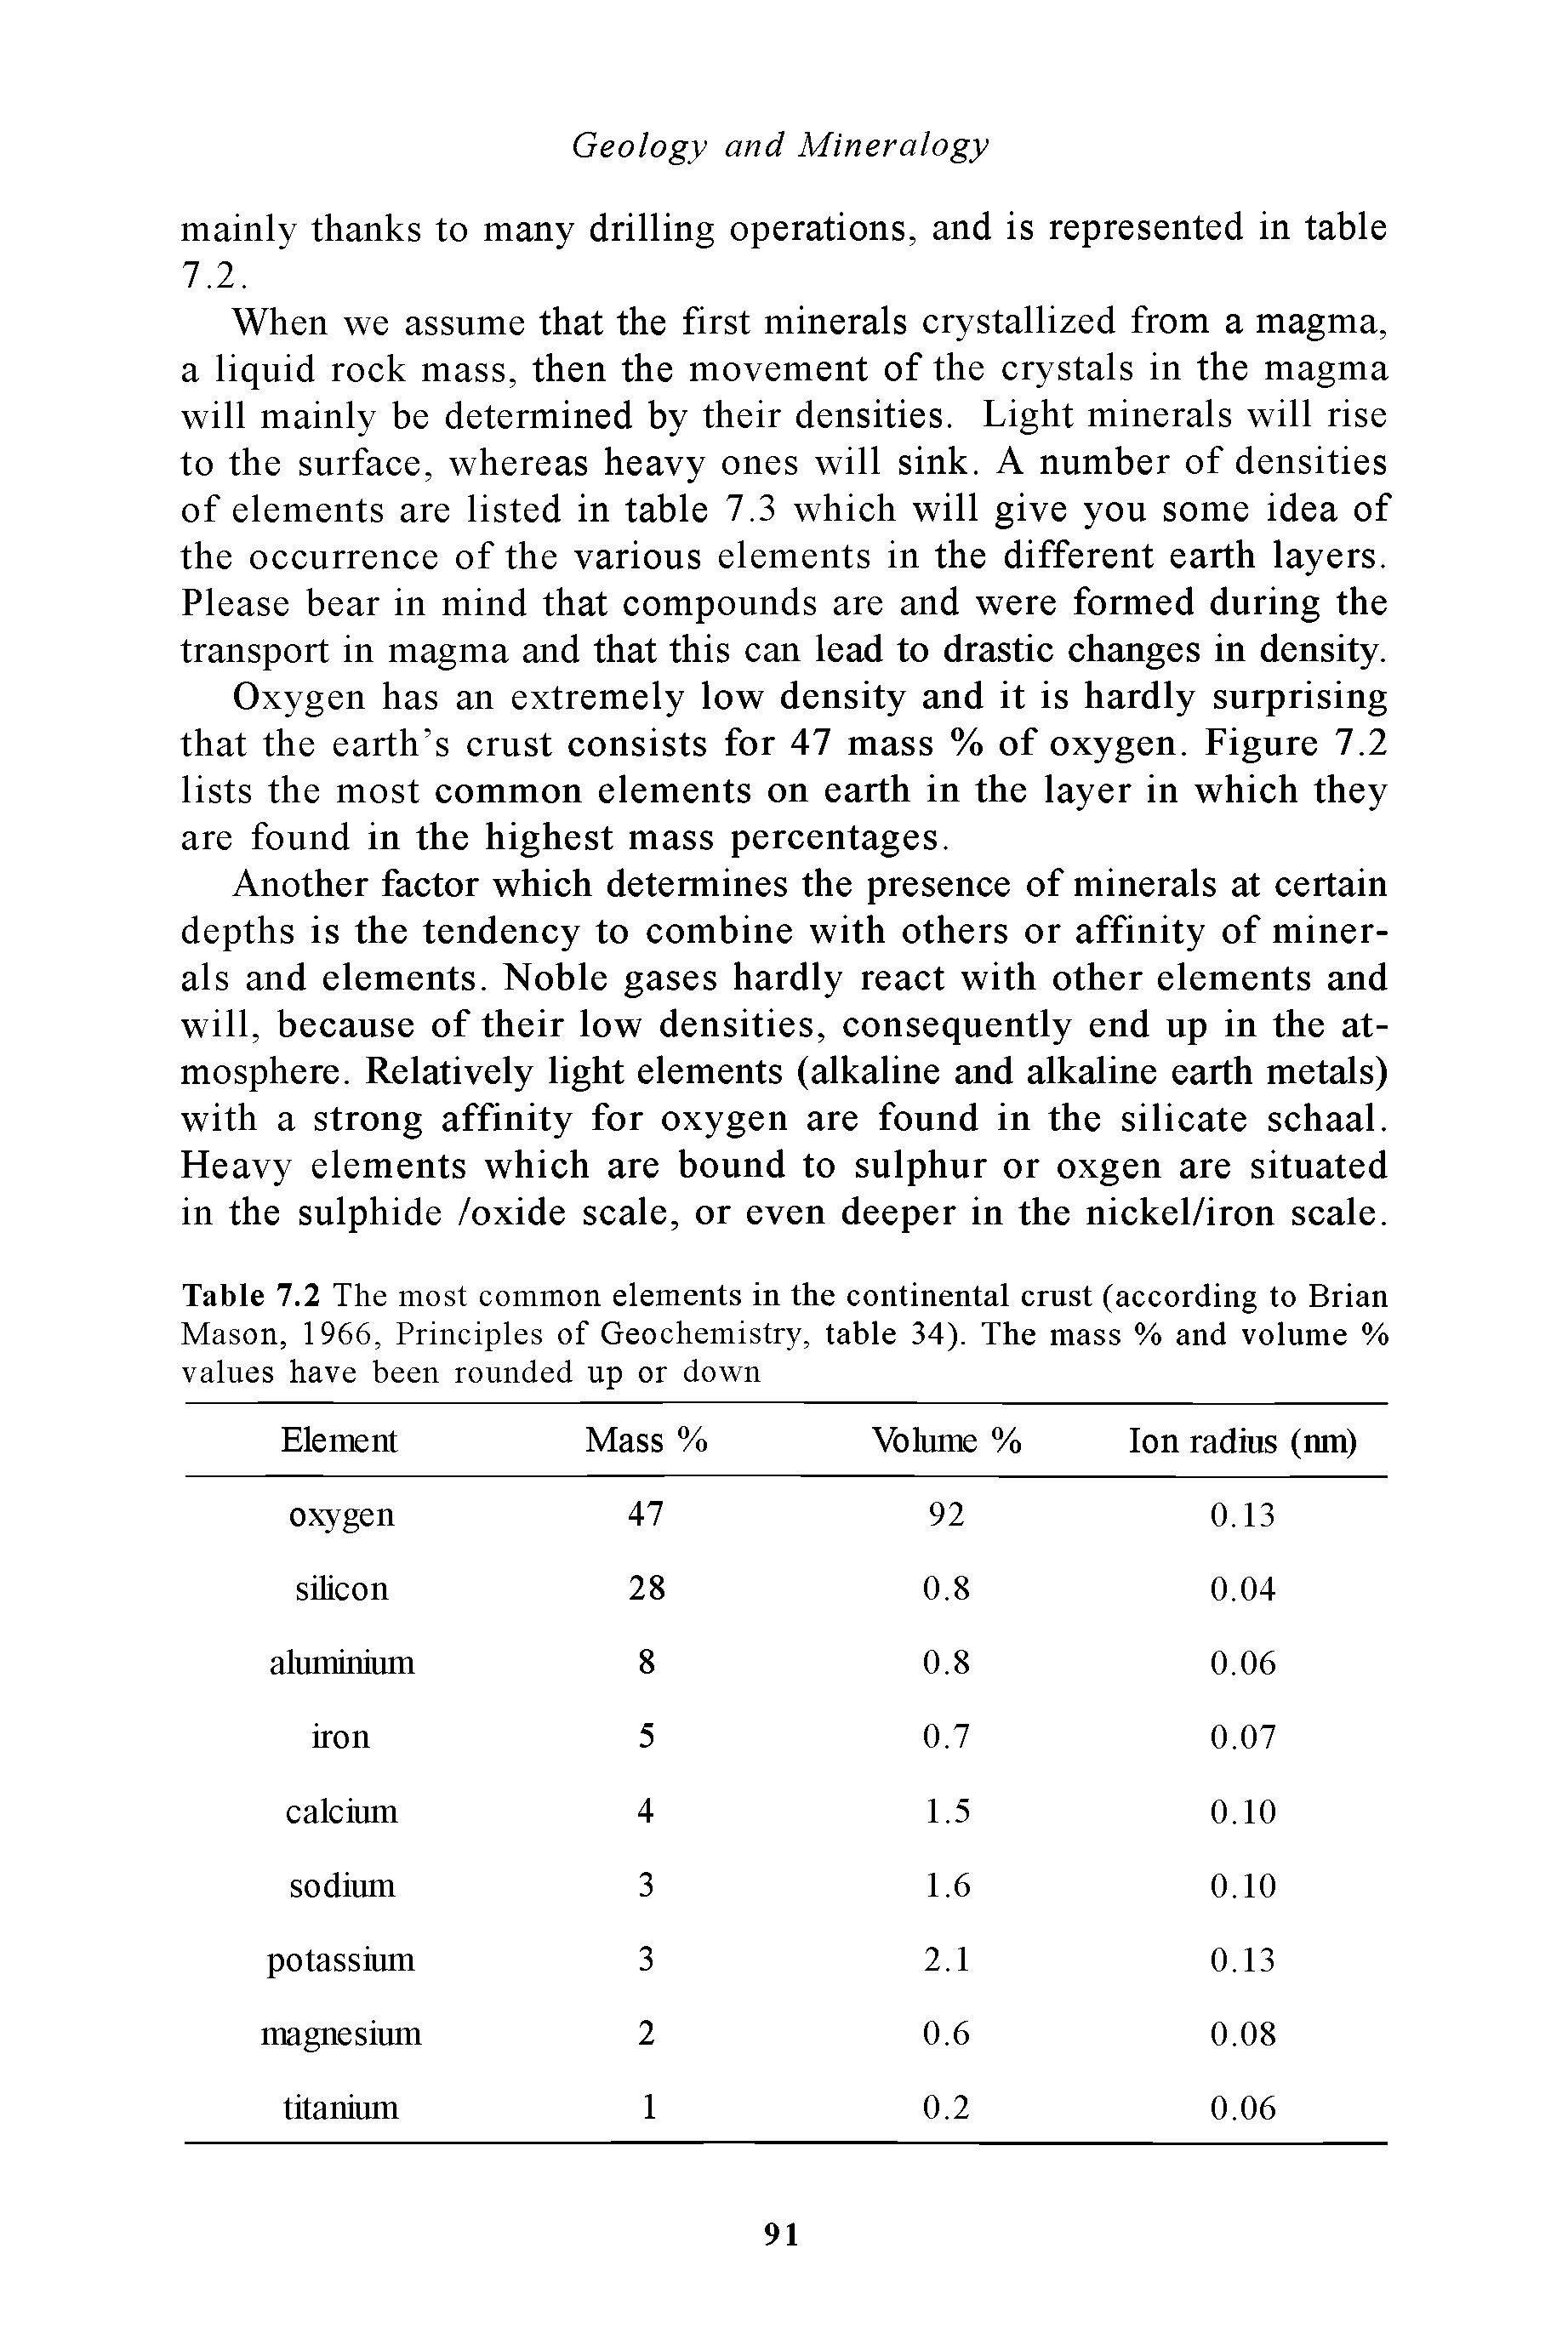 Table 7.2 The most common elements in the continental crust (according to Brian Mason, 1966, Principles of Geochemistry, table 34). The mass % and volume % values have been rounded up or down...